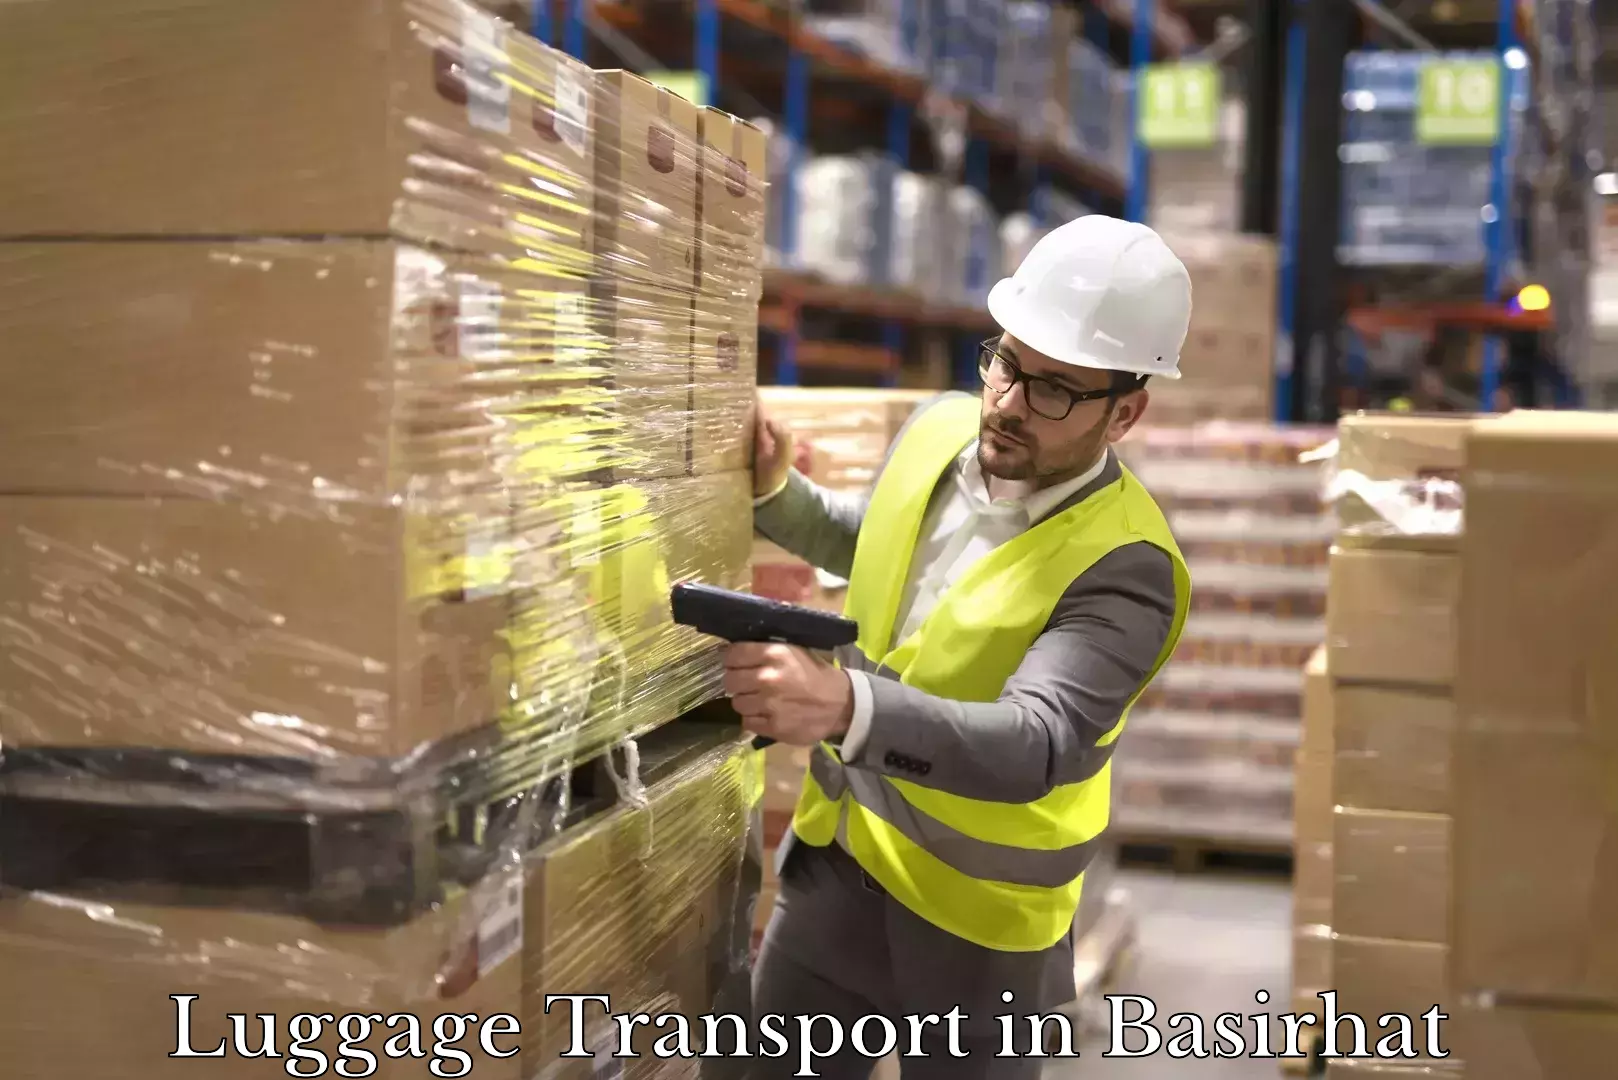 Luggage shipment specialists in Basirhat